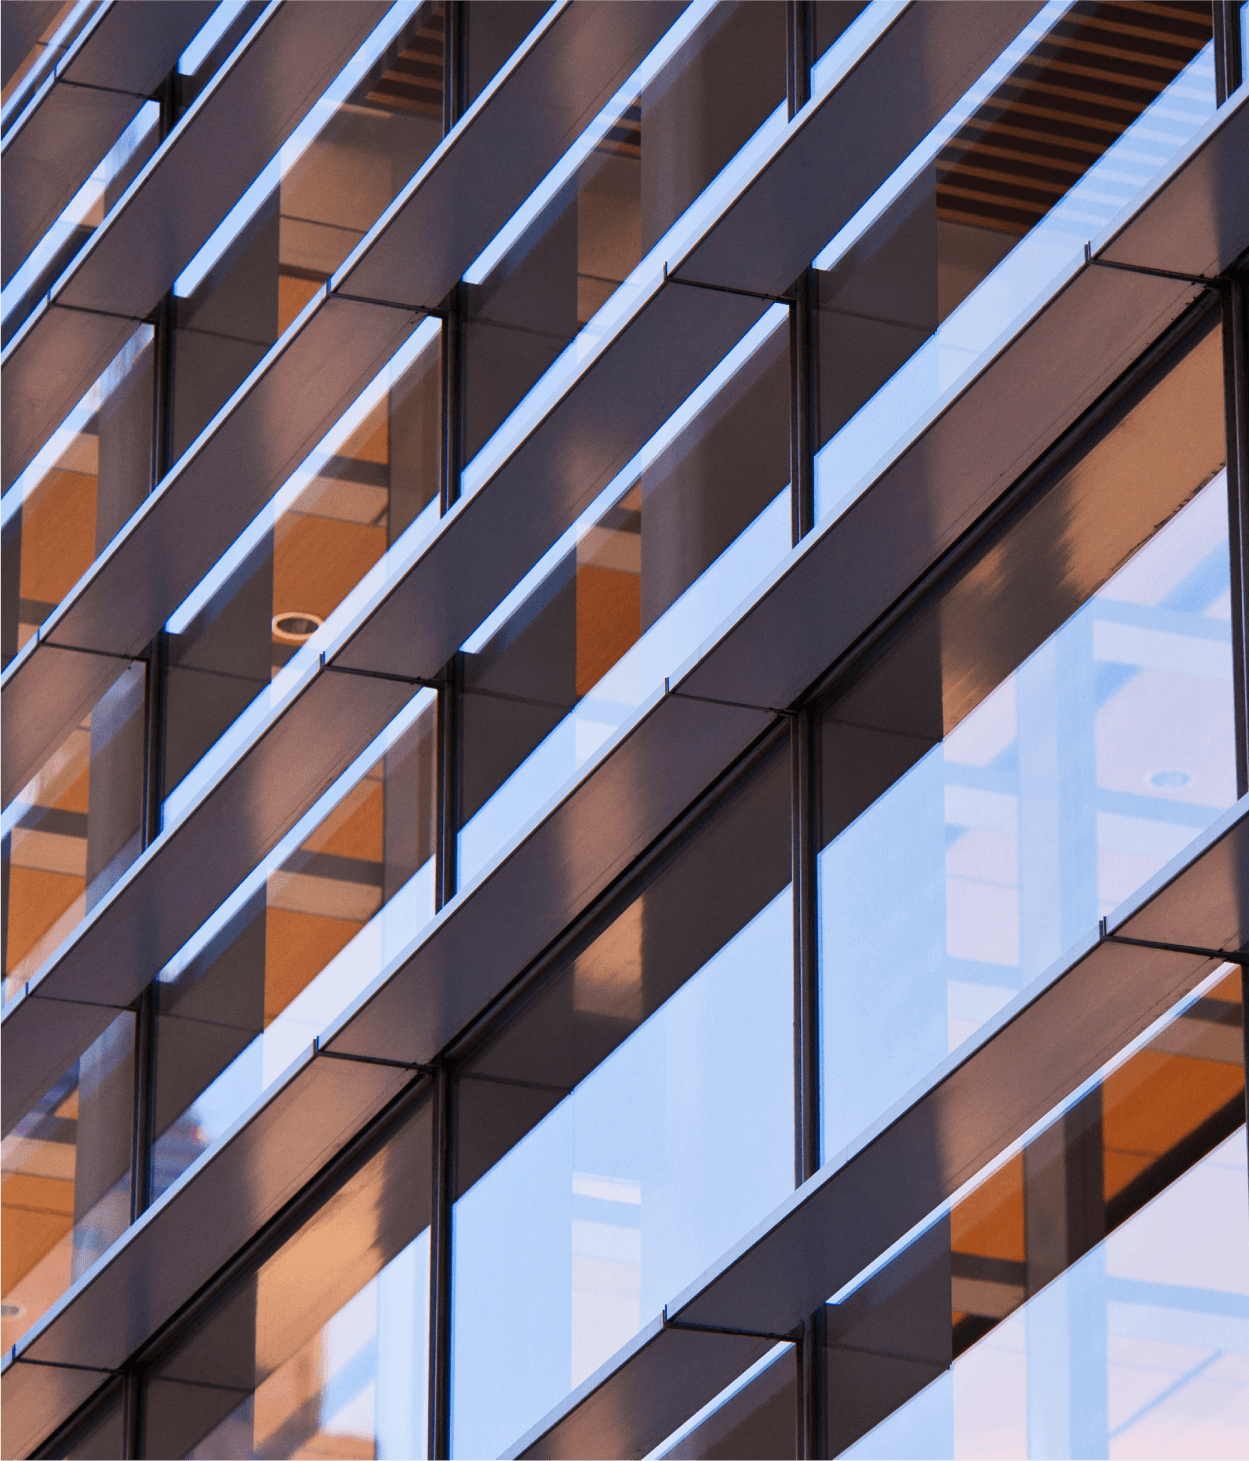 Low angle view of exterior office building windows